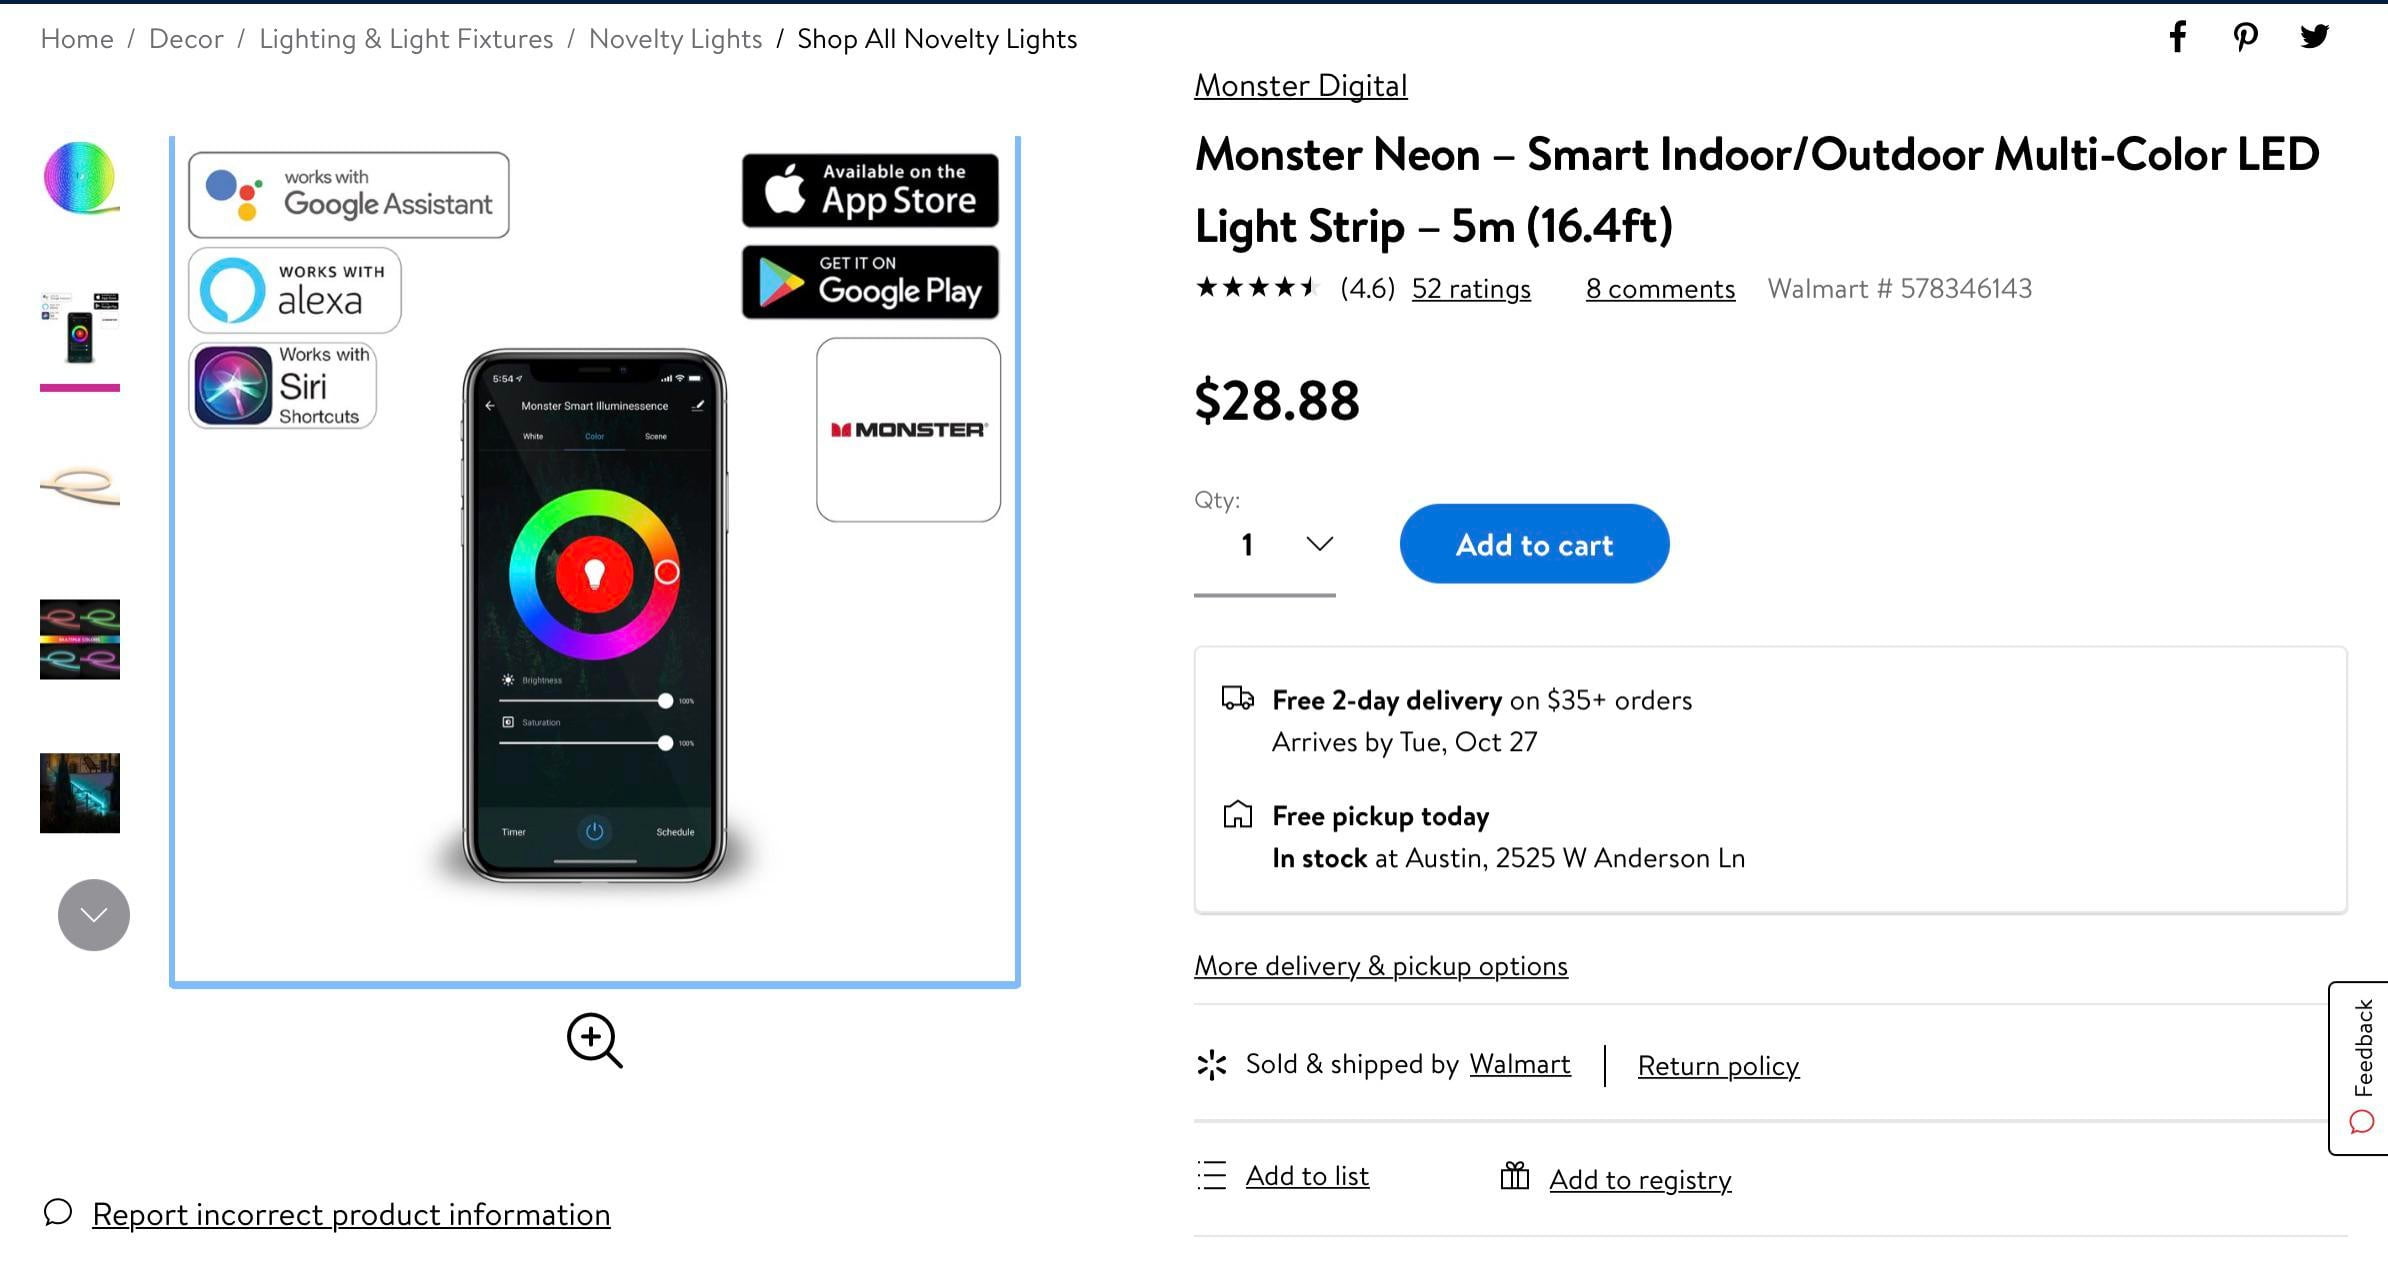 Has anyone tried tested Monster Neon